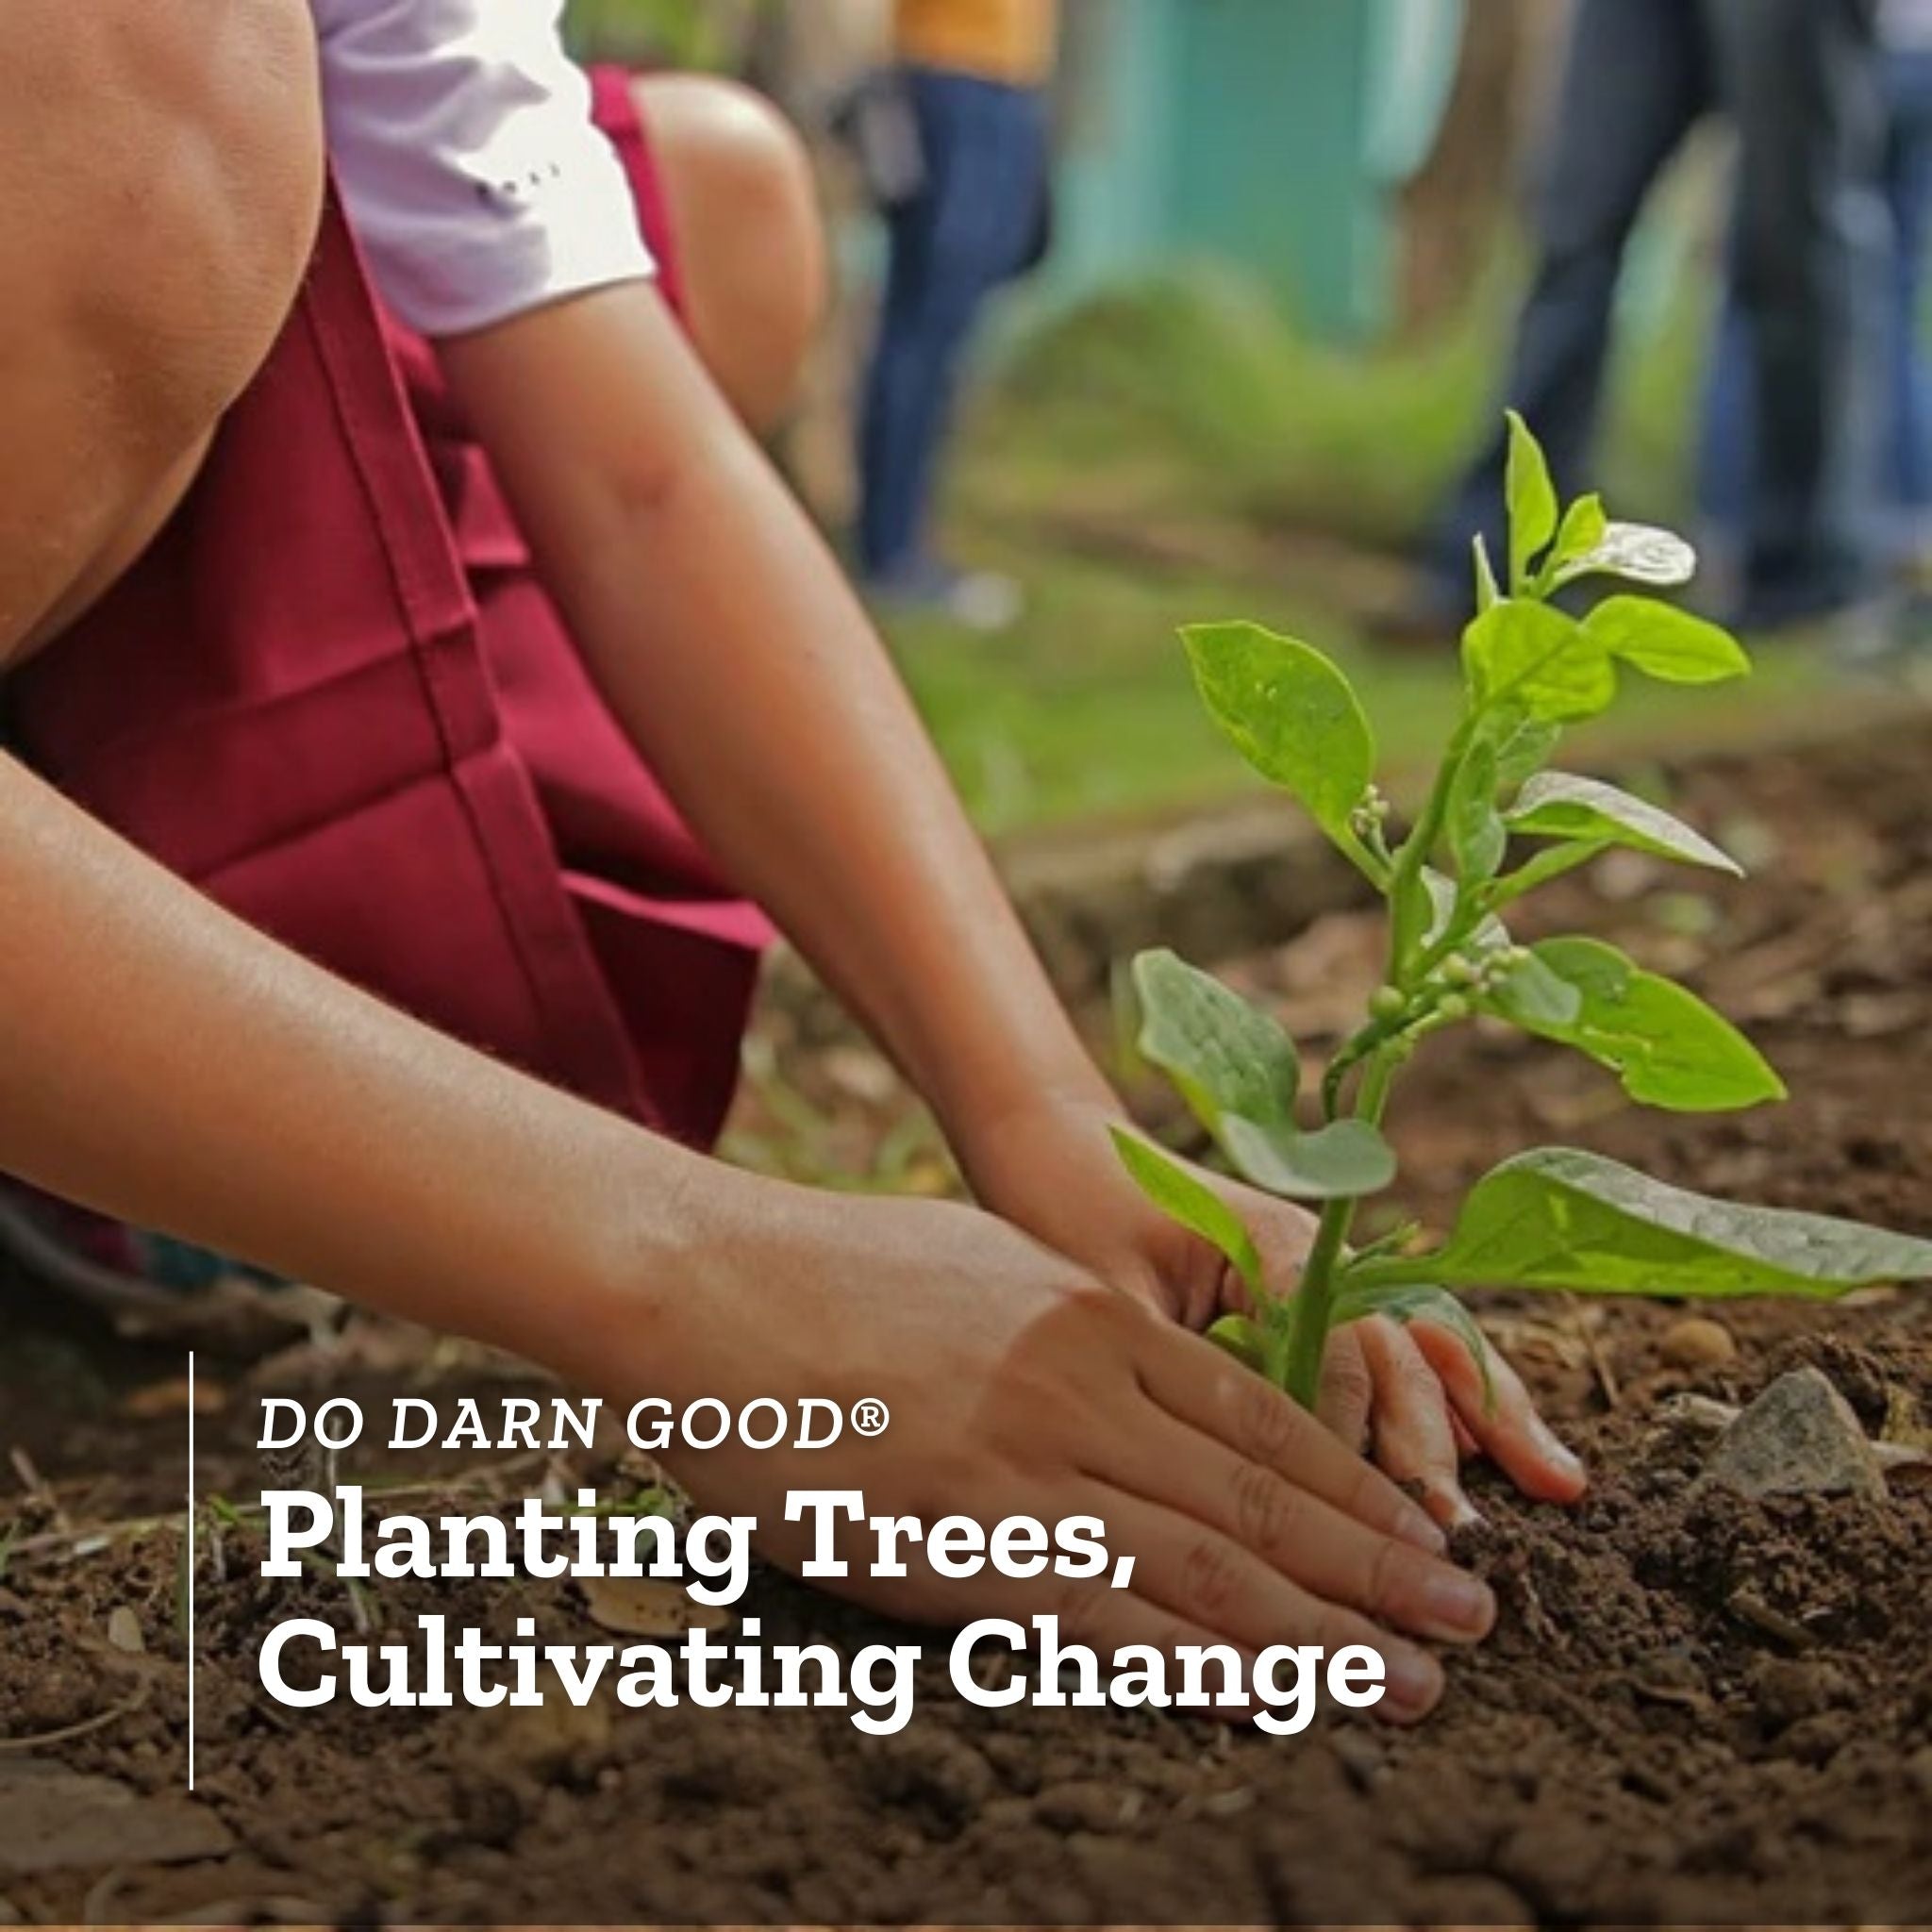 Do Darn Good®: Planting Trees, Cultivating Change